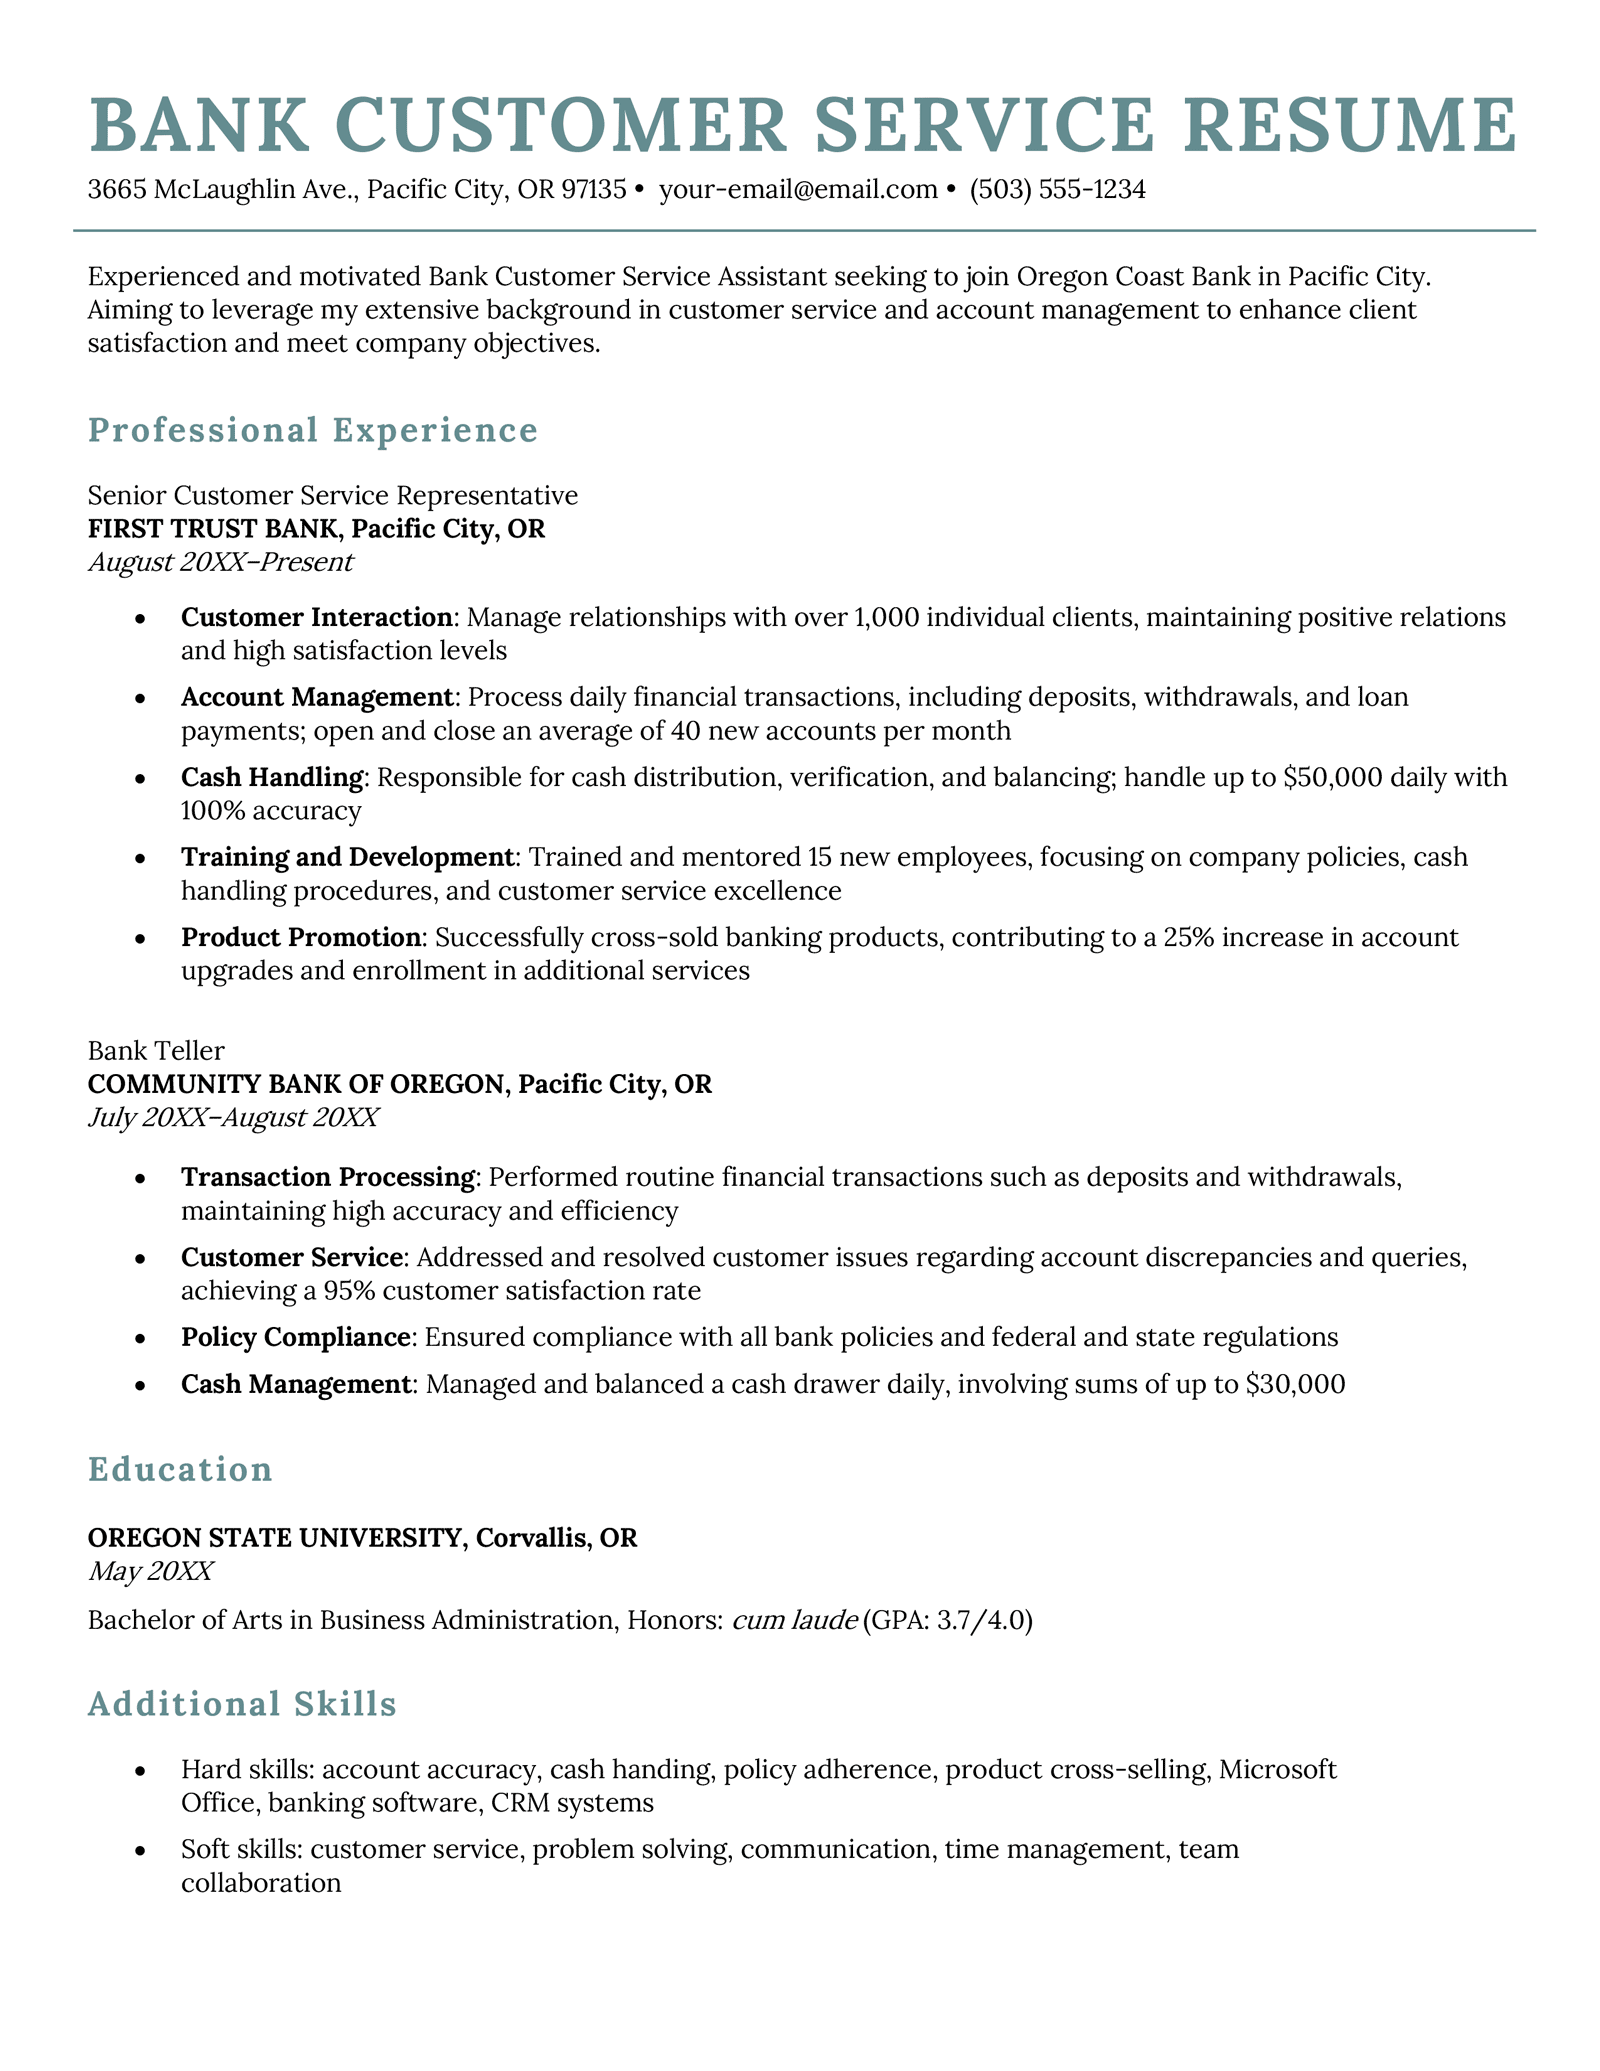 A bank customer service resume that uses a teal color scheme and subtle section headings.